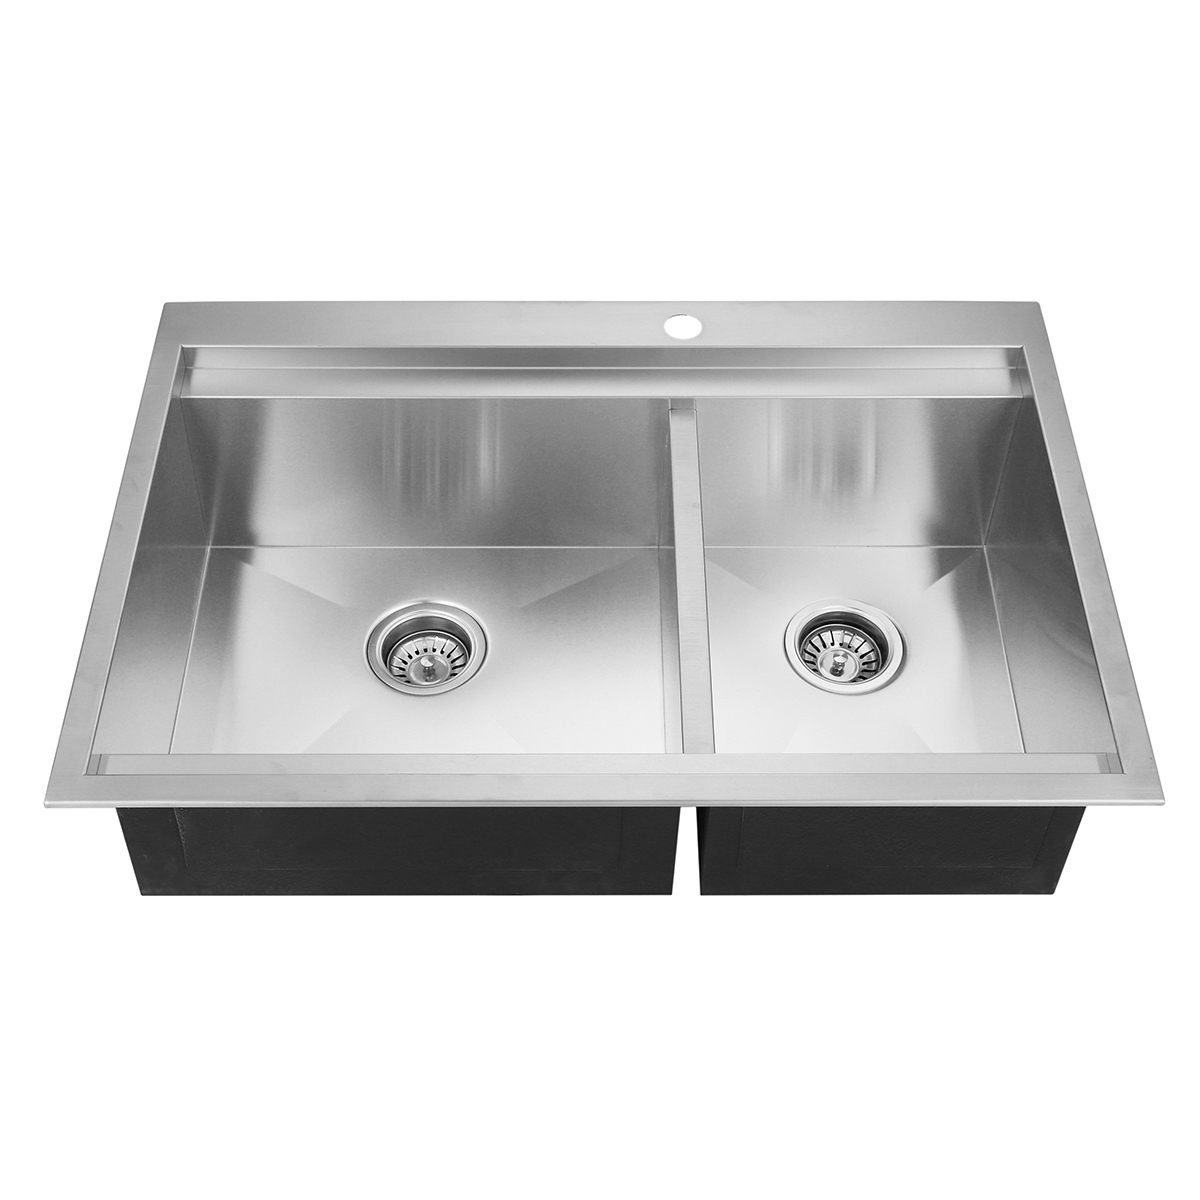 Silvery White Stainless Steel Handmade Topmount Double Bowl Kitchen Sink with Ledge